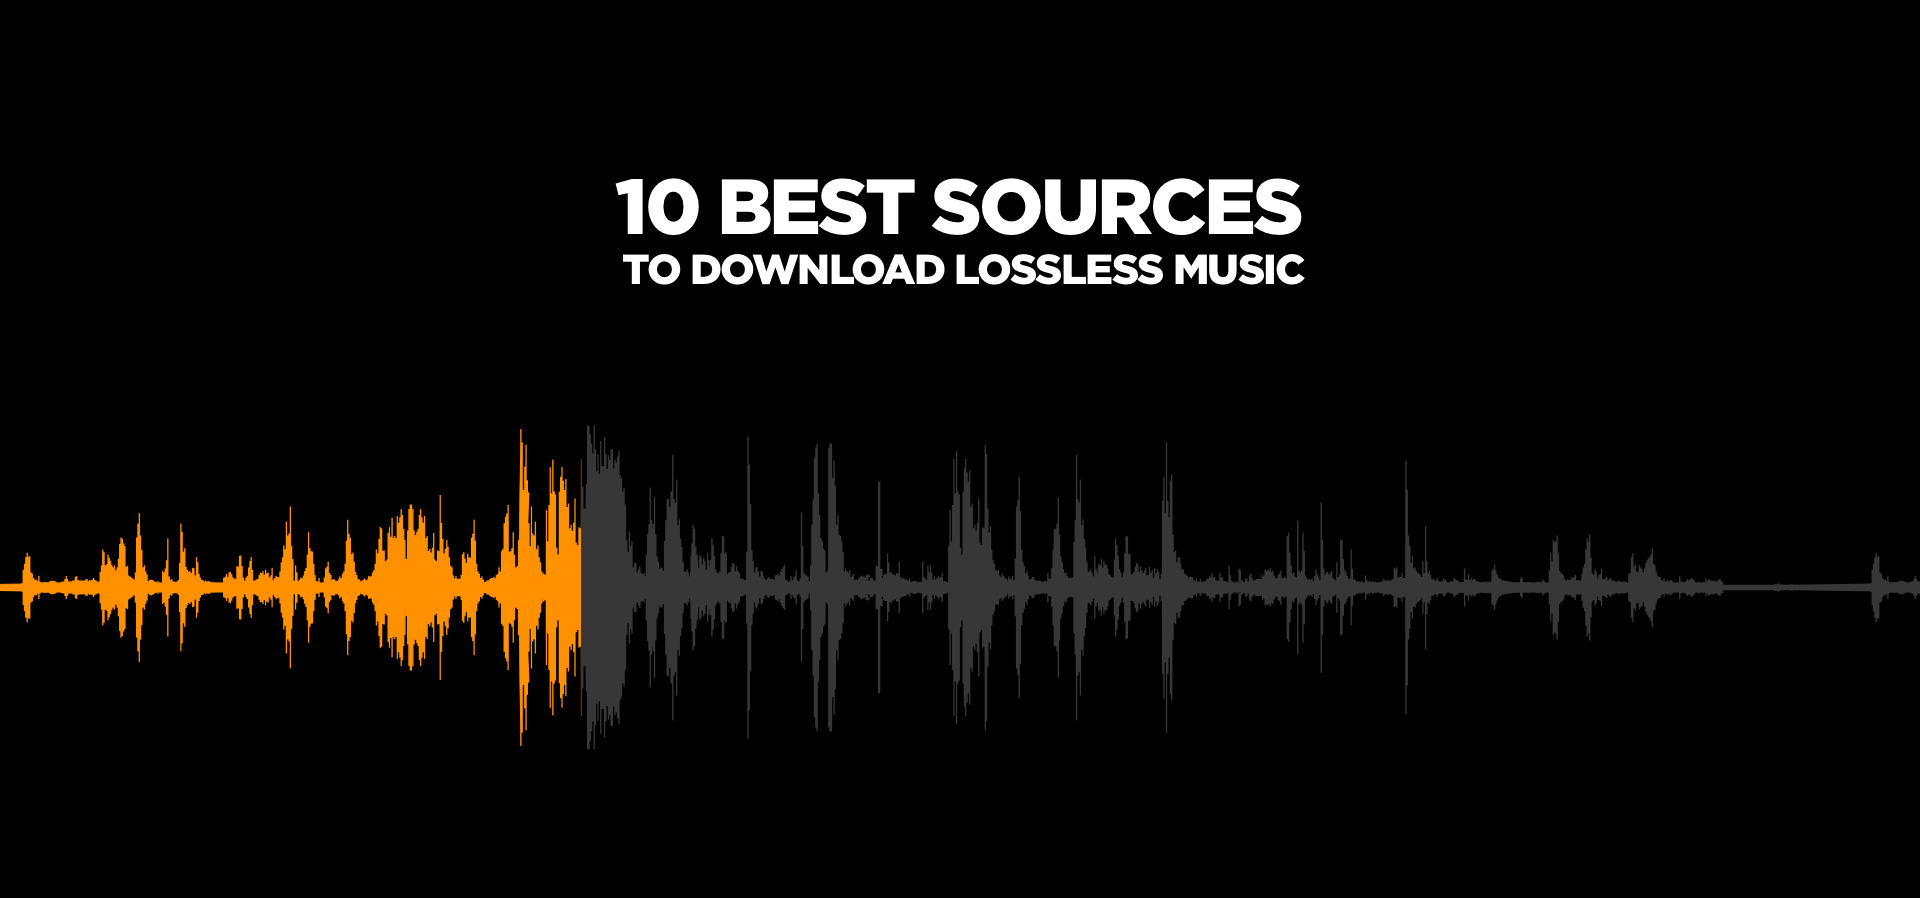 How To Download Lossless Music